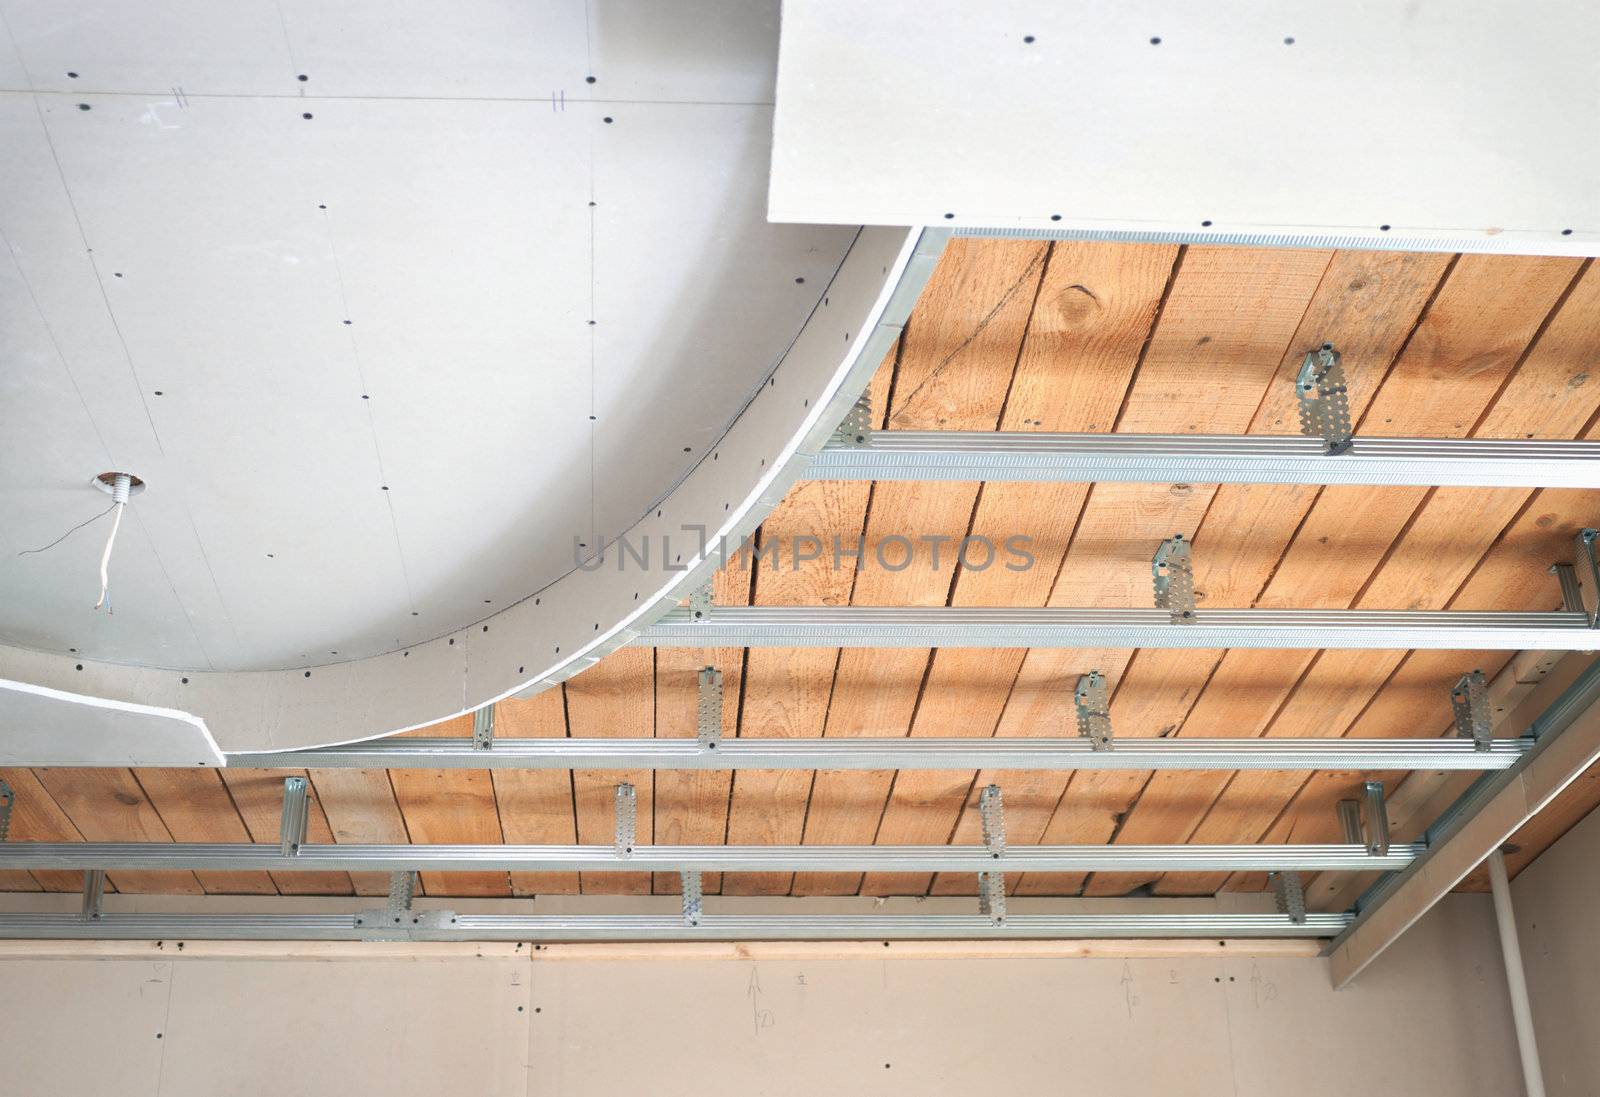  Suspended ceiling is made up of drywall